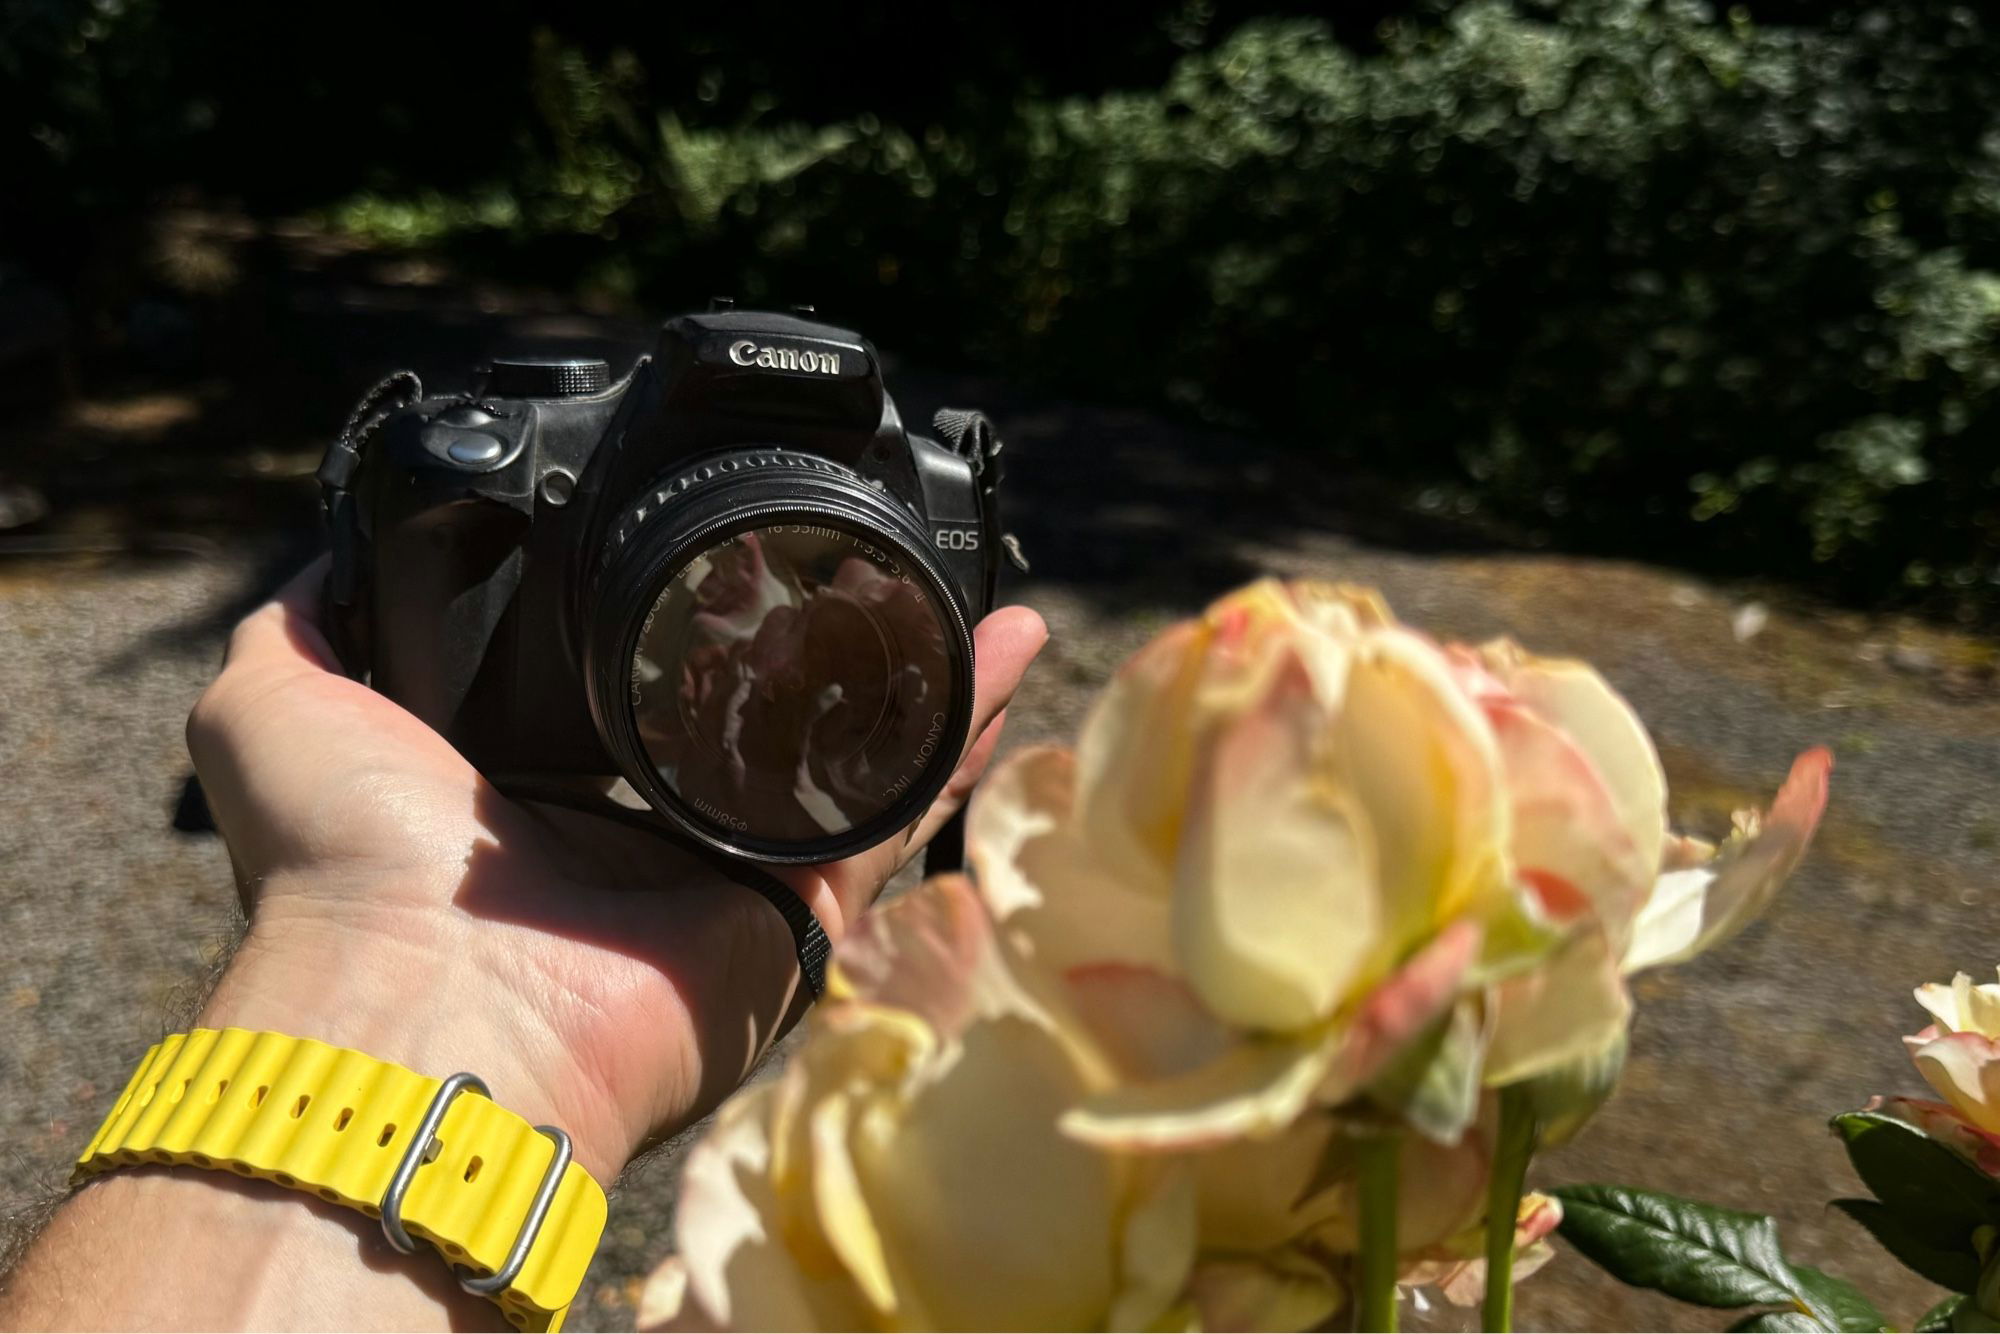 A hand holding a Canon EOS camera, focused on a rose in the foreground with a blurred garden background.